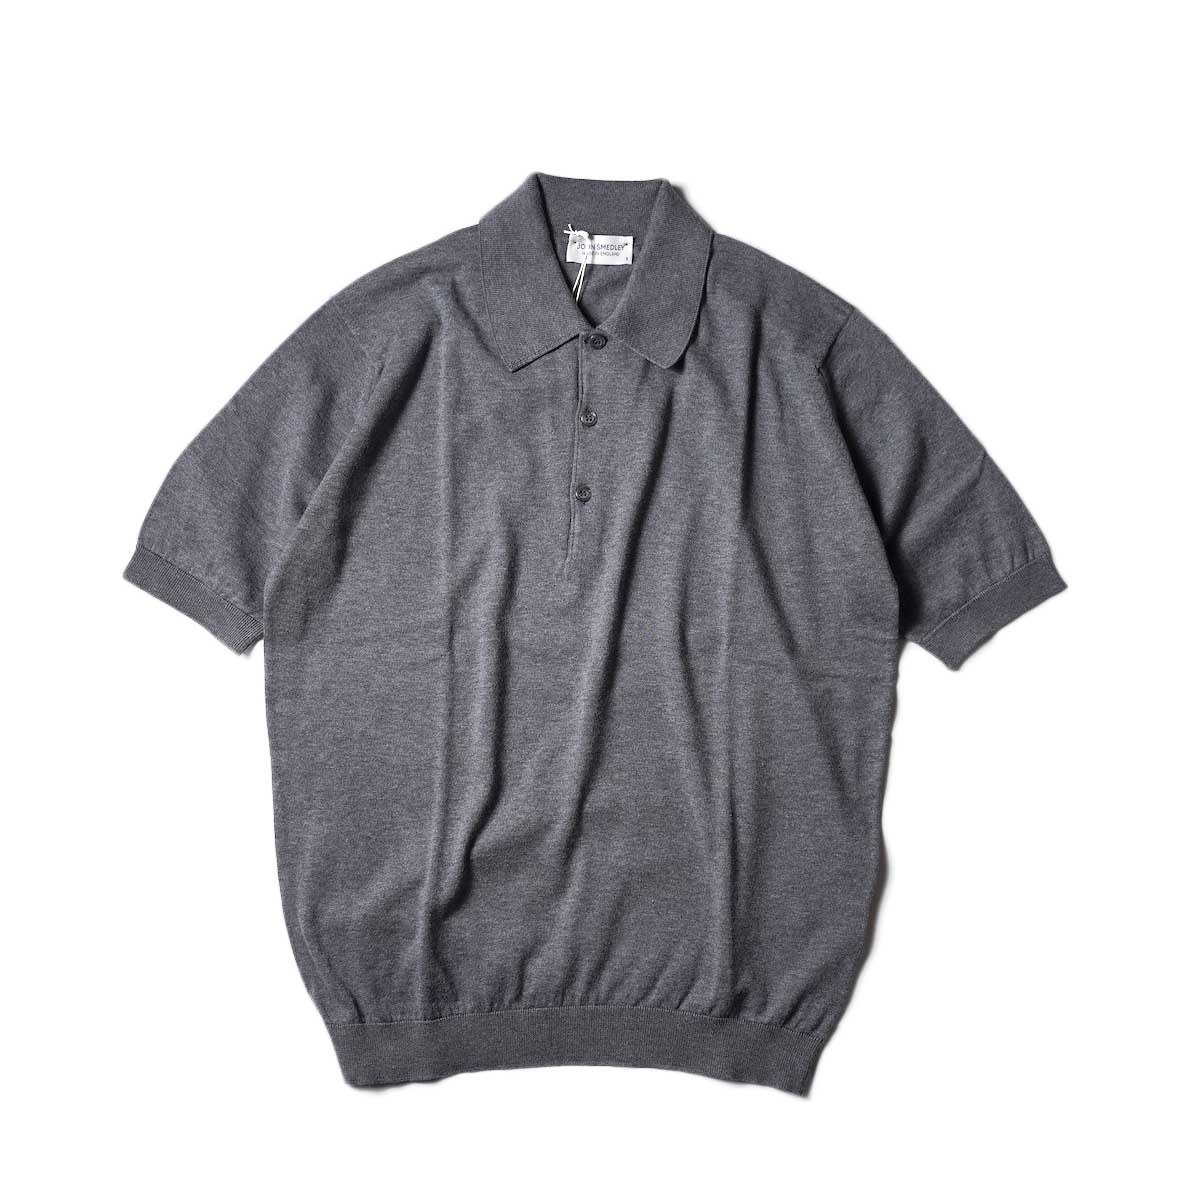 JOHN SMEDLEY / ISIS S/S Knit Polo (Charcoal)